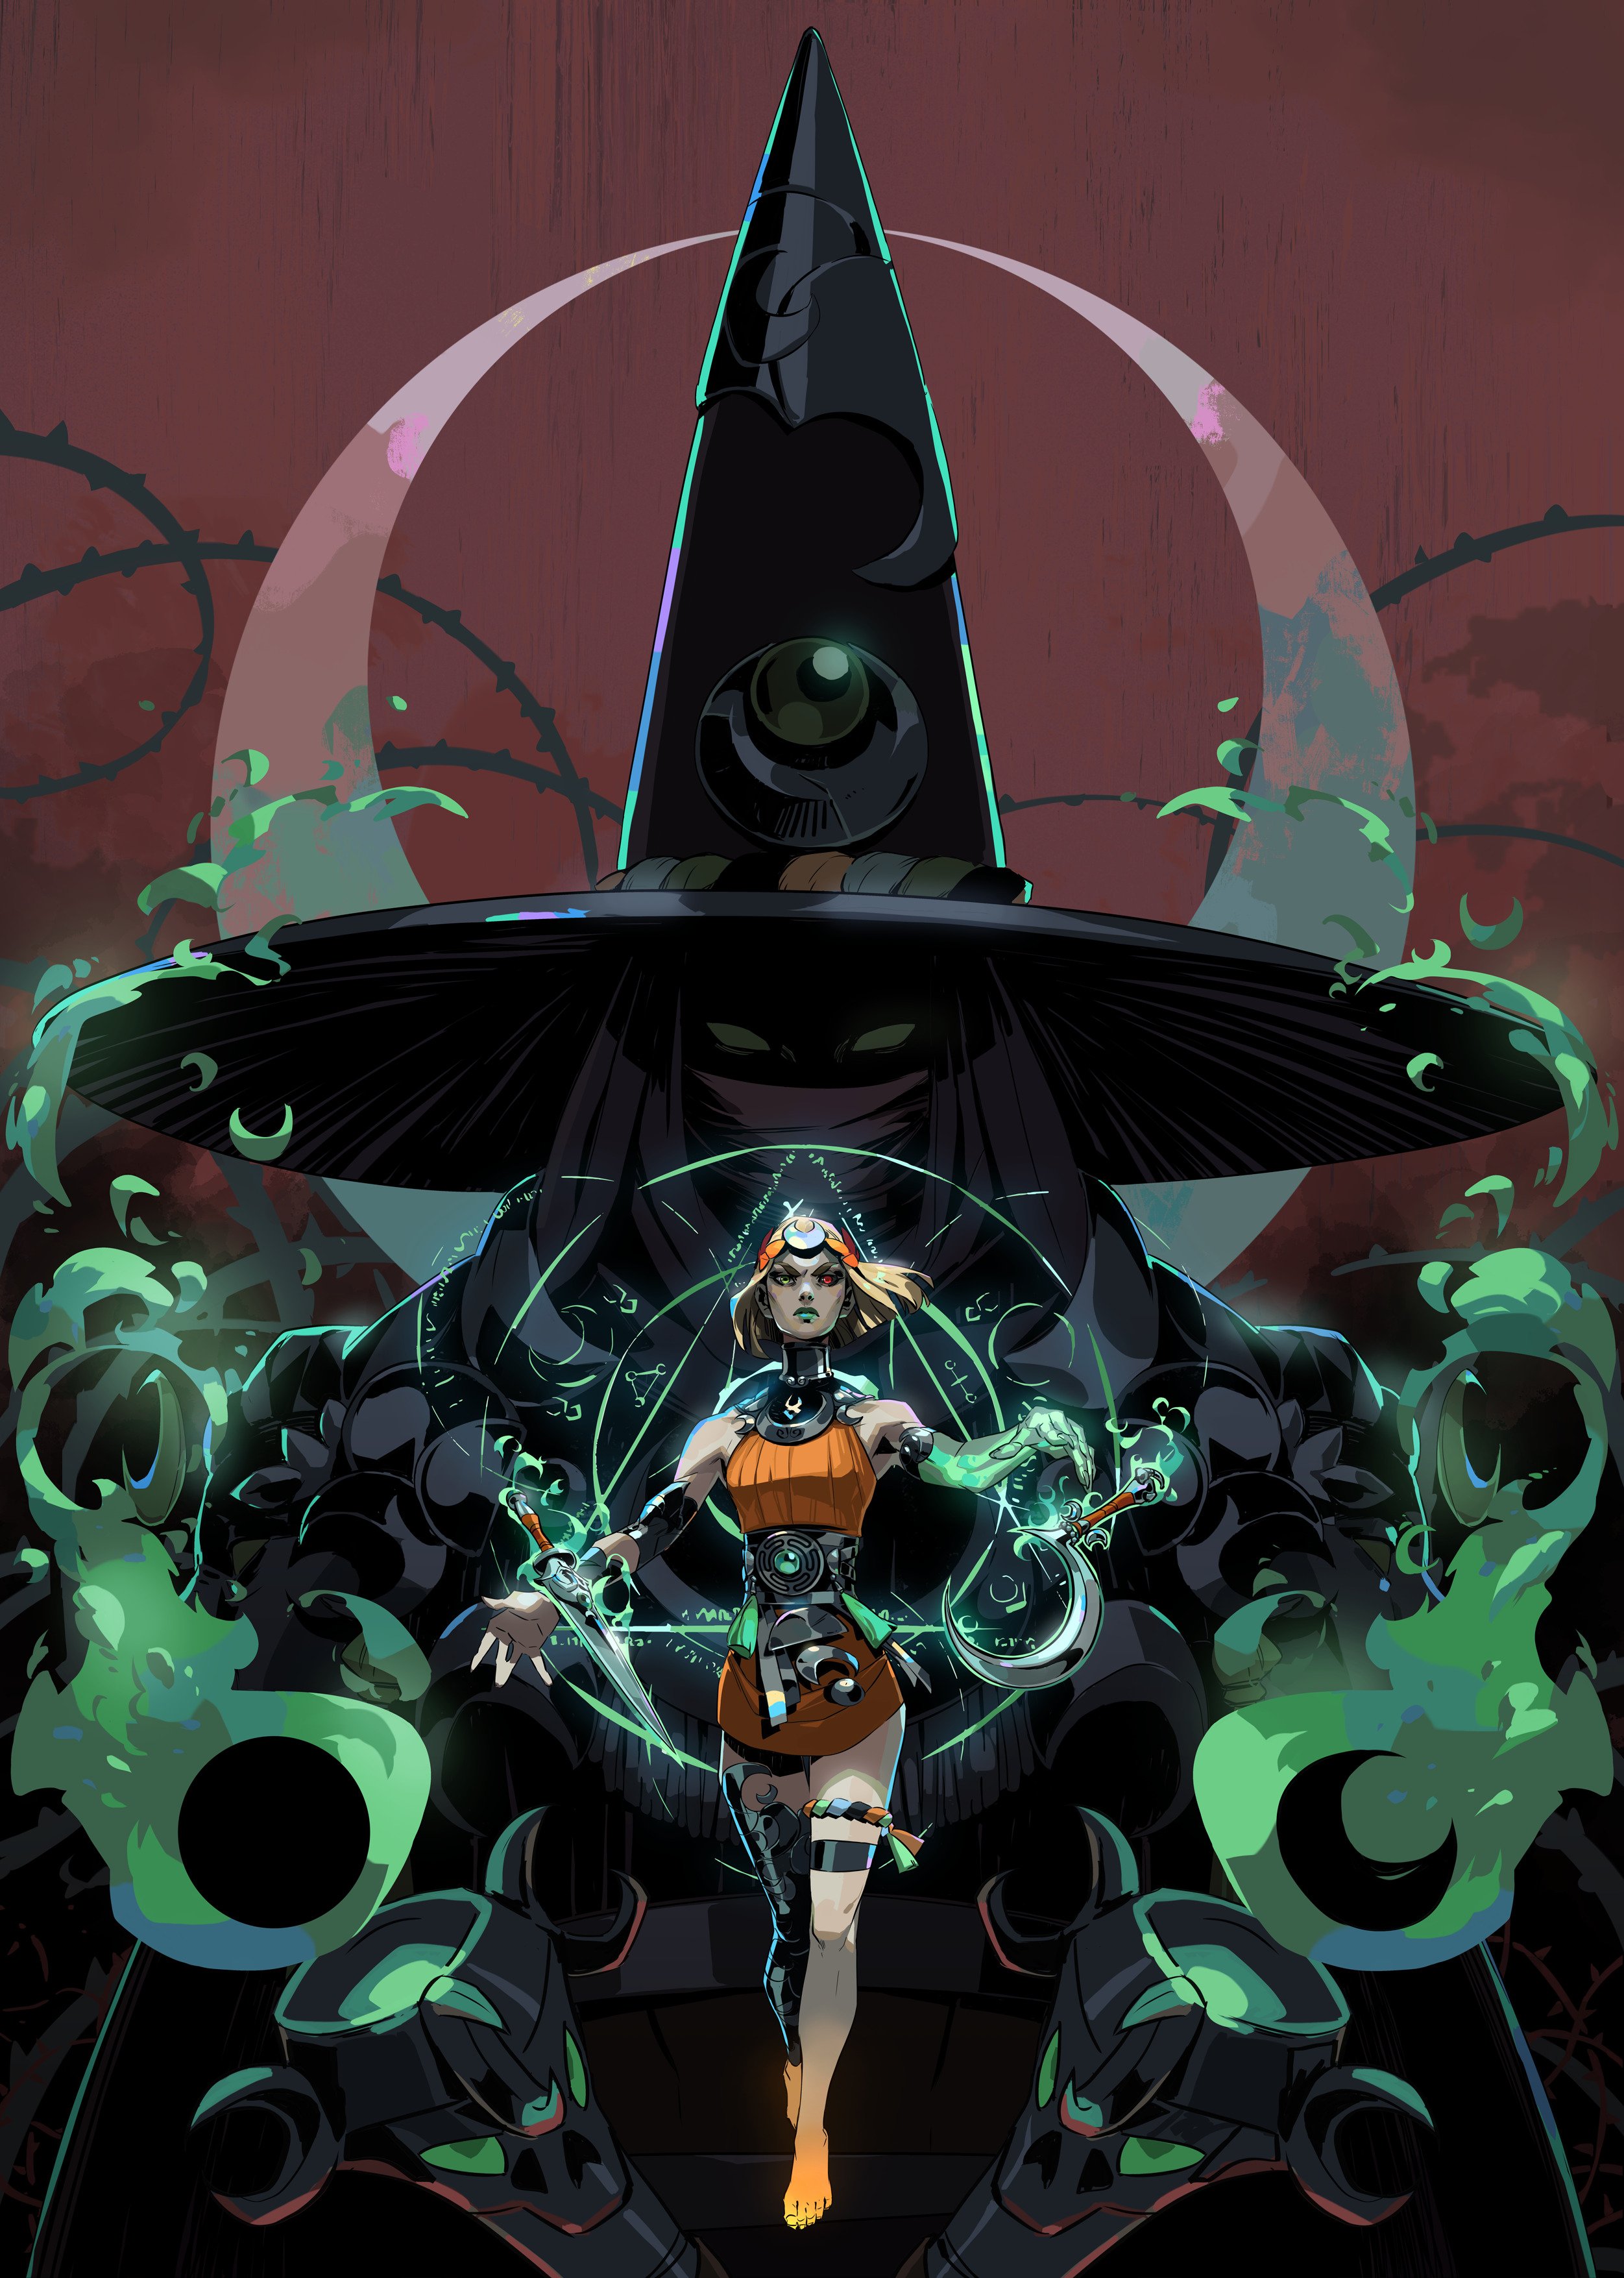 Hell yes! Supergiant returns with Hades 2